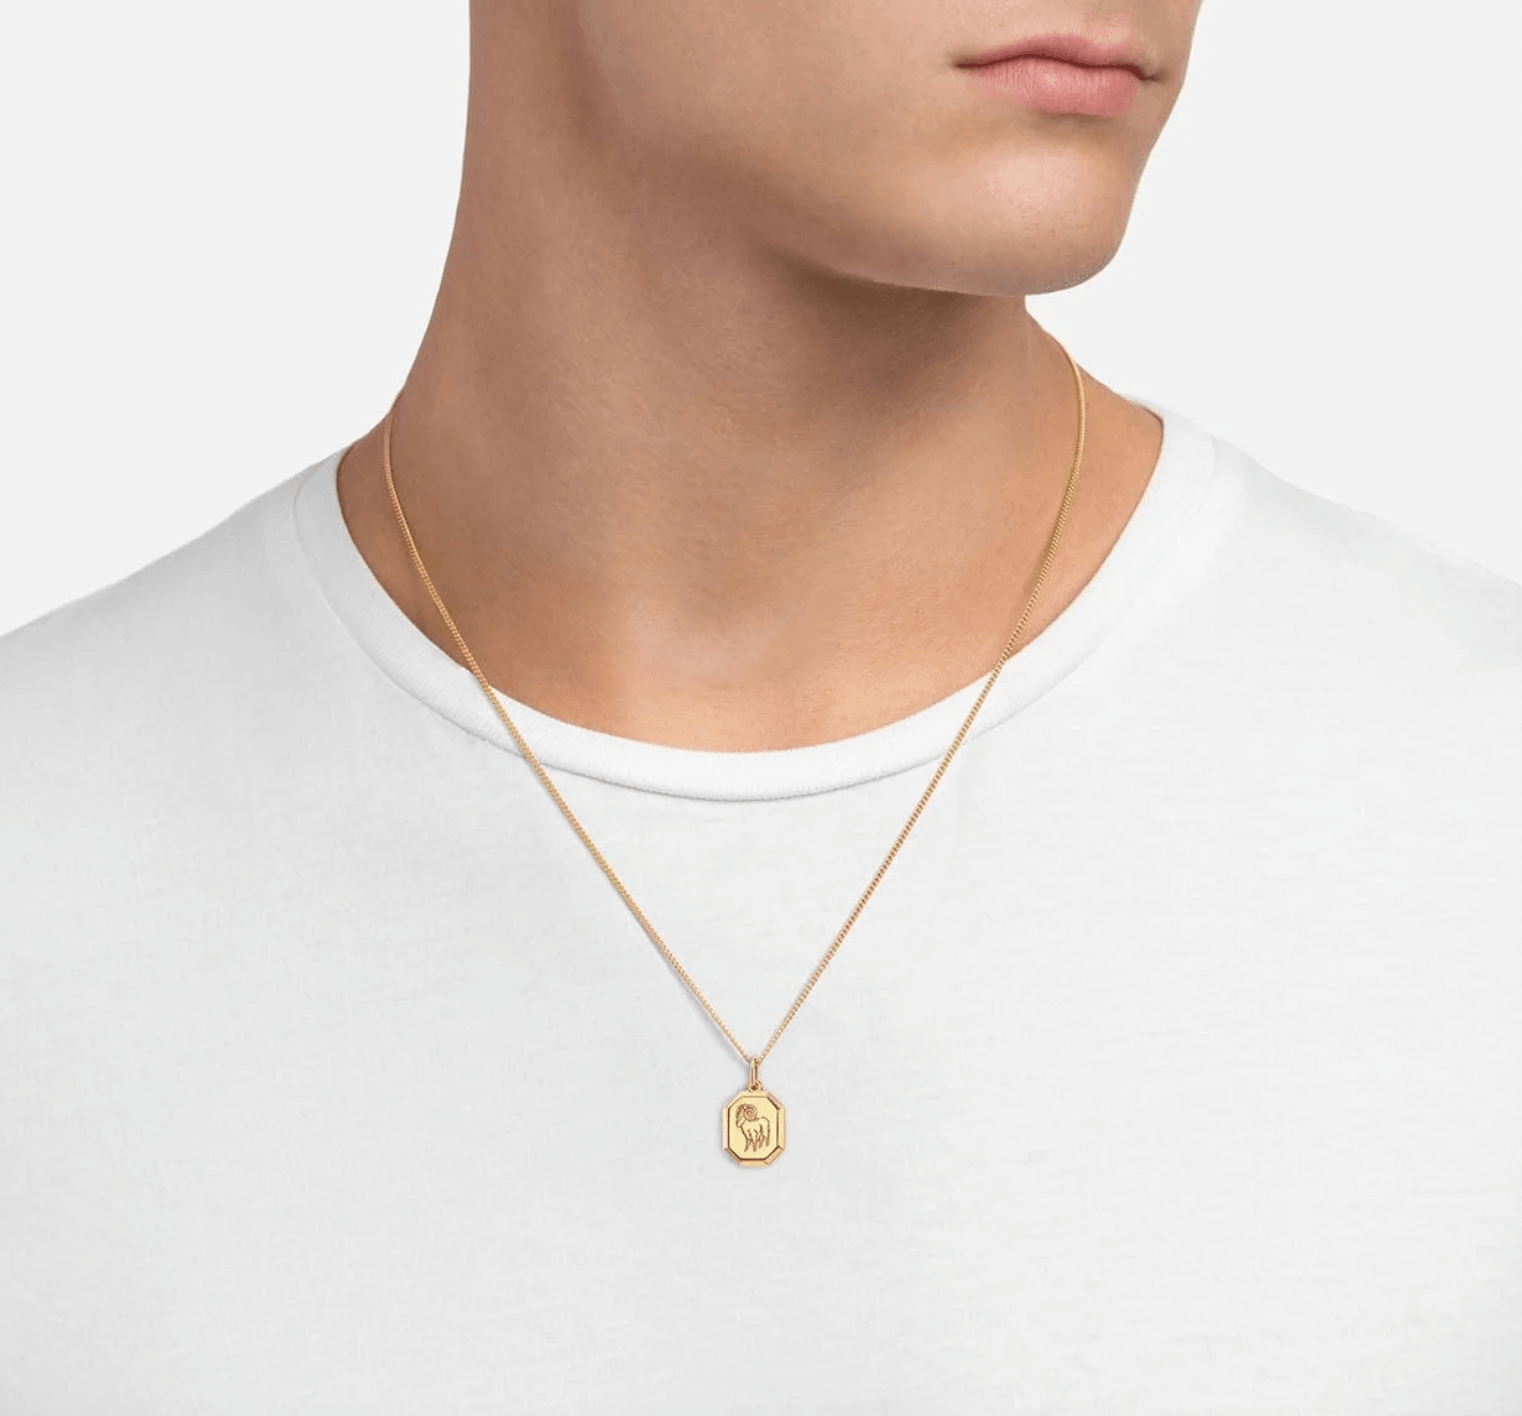 Aries Nyle Pendant Necklace by Miansai - Haven